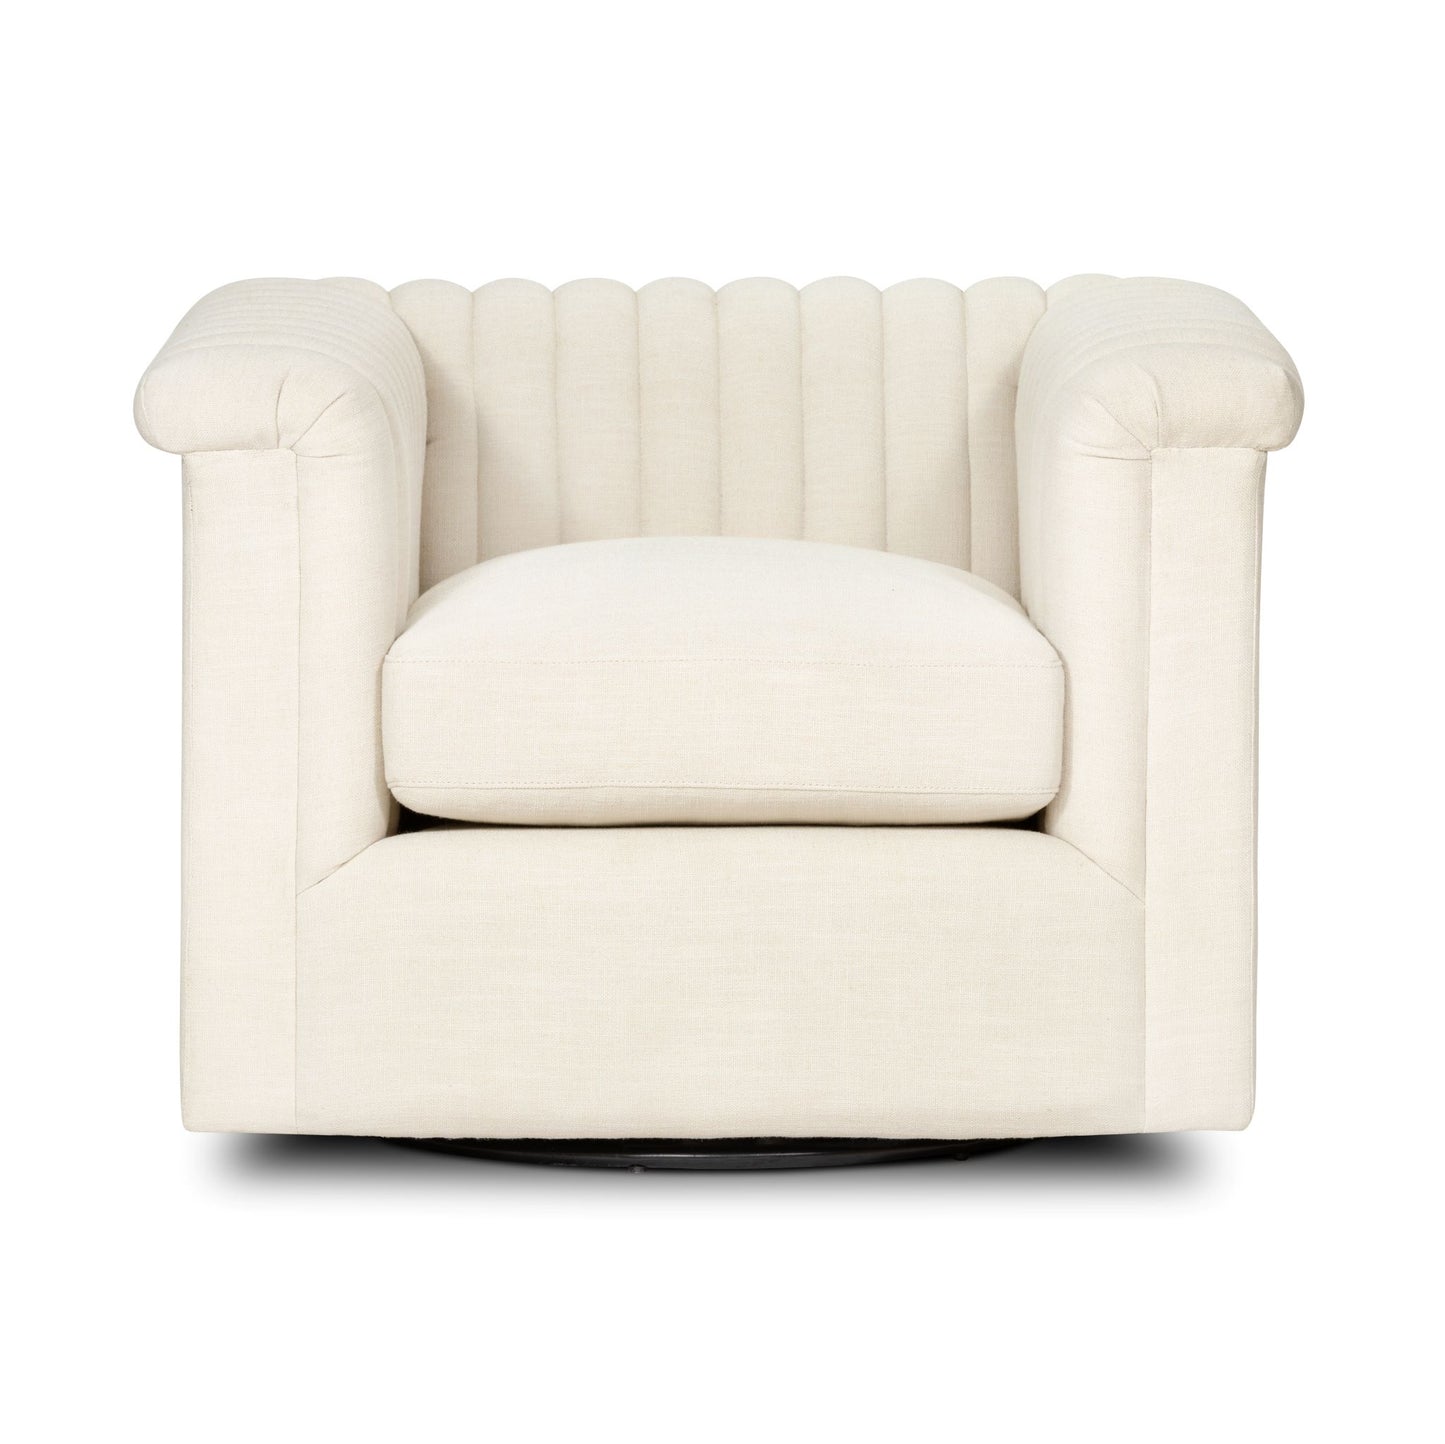 Load image into Gallery viewer, Watson Swivel Chair-Cambric Ivory Swivel Chair Four Hands     Four Hands, Mid Century Modern Furniture, Old Bones Furniture Company, Old Bones Co, Modern Mid Century, Designer Furniture, https://www.oldbonesco.com/
